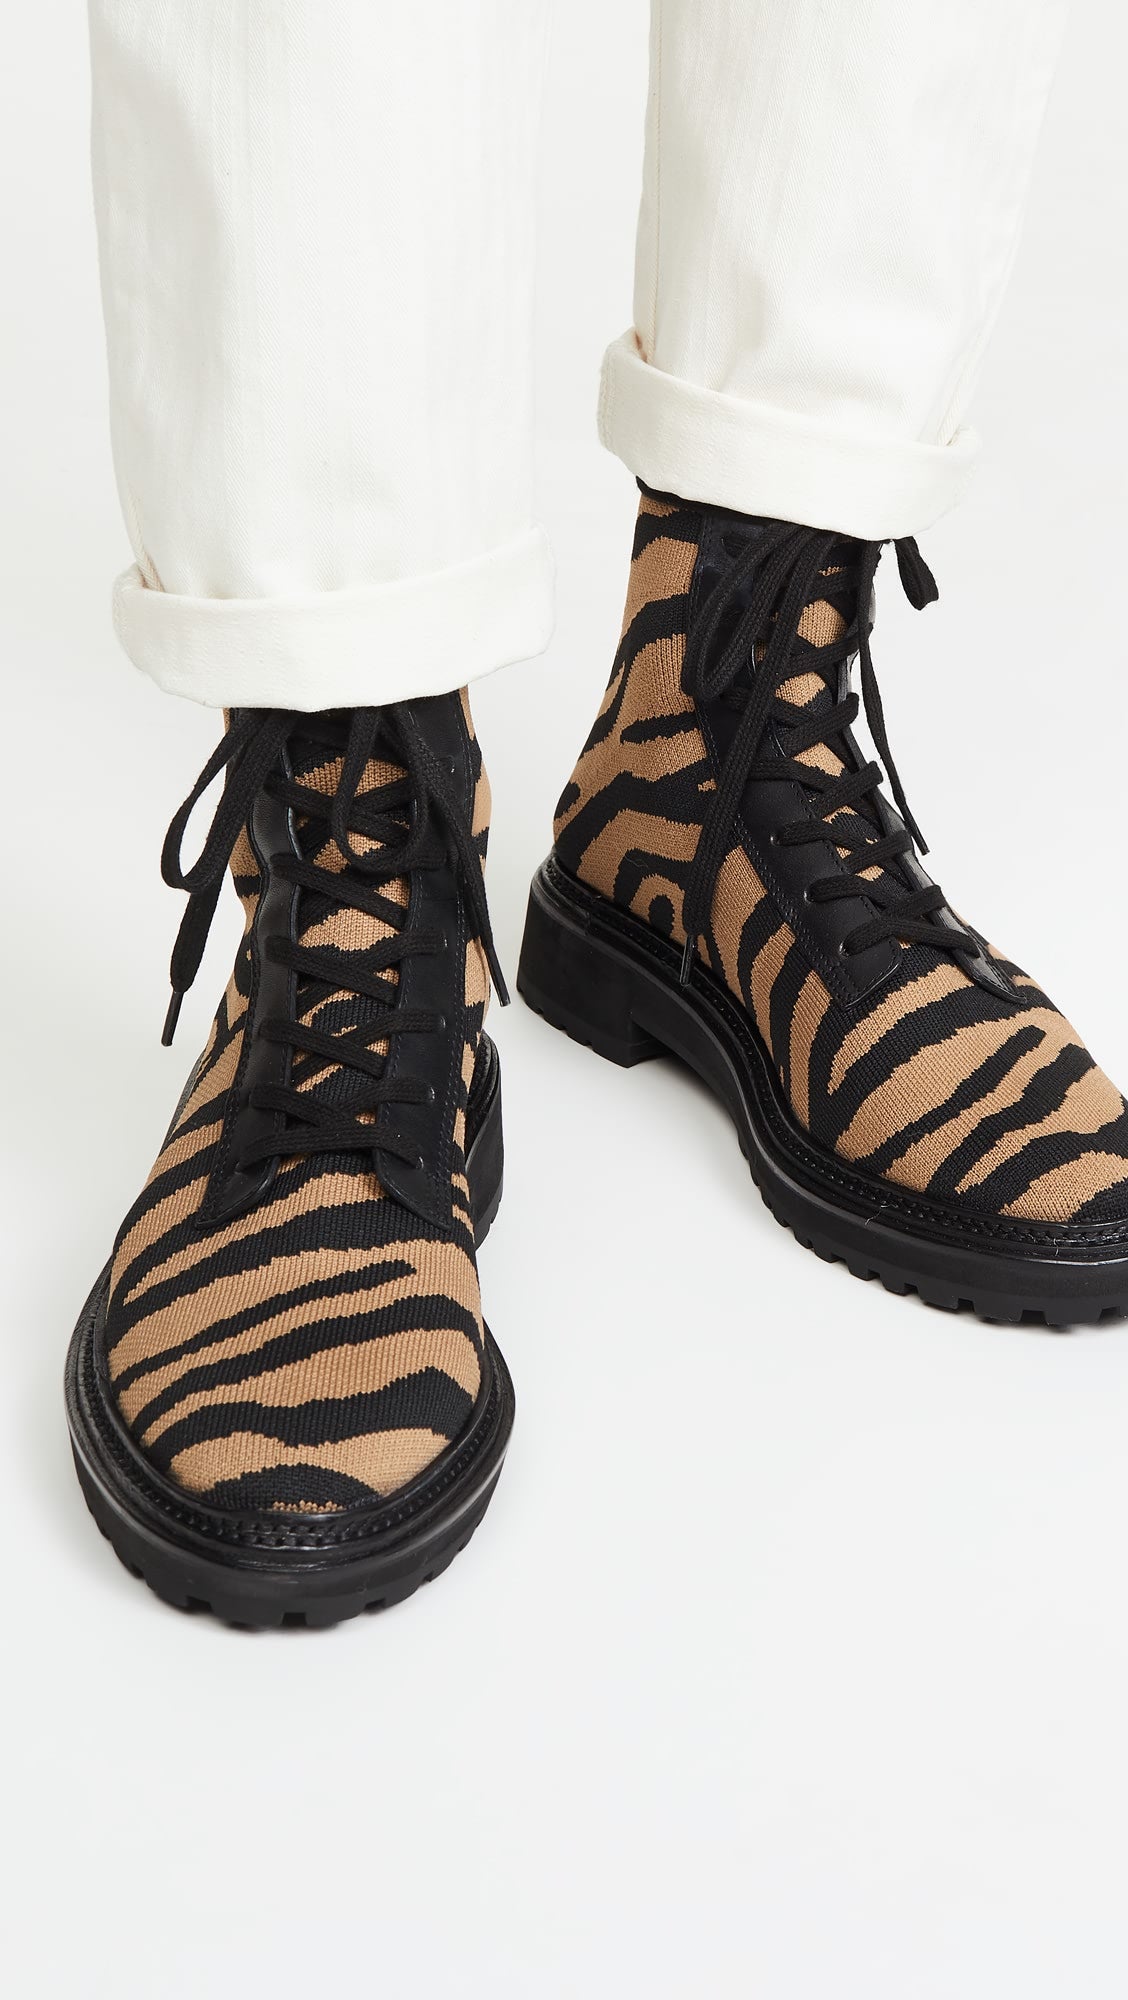 Loeffler Randall Brady Tiger Stripe Brown and Black Knit Lace-up Boots SIZE 7.5